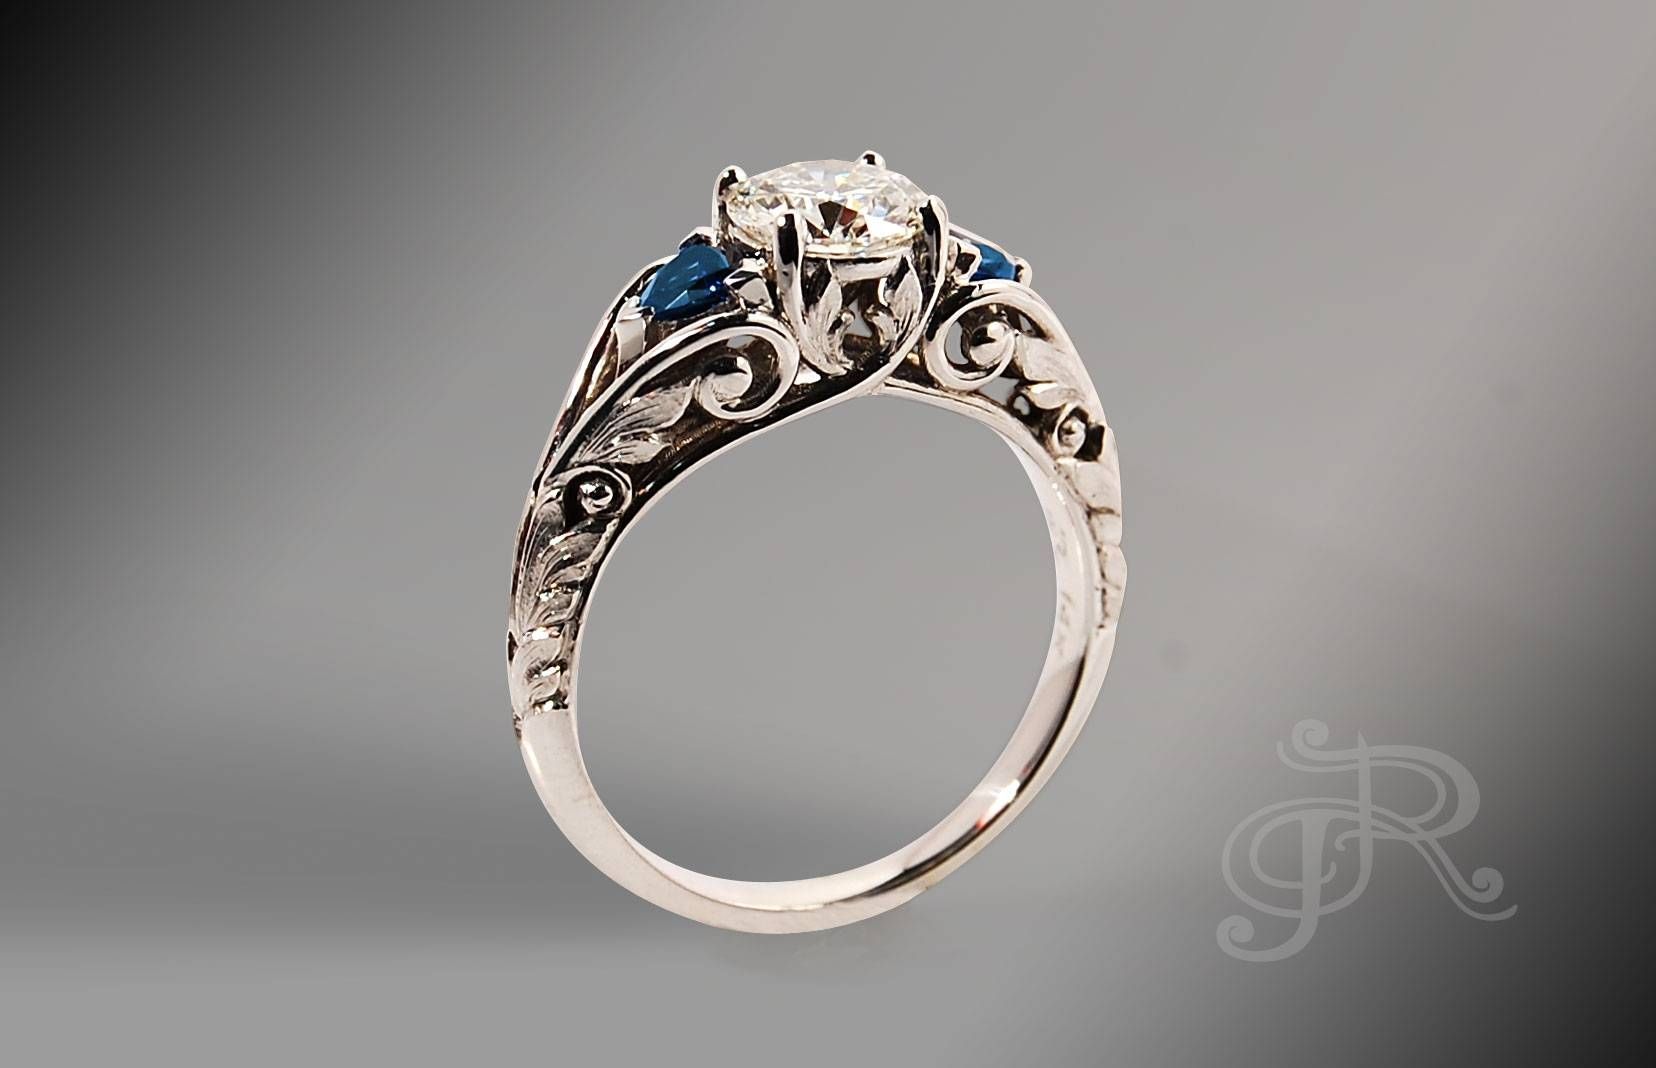 $100 3d Printed Engagement Ring With Elven Engagement Rings (View 8 of 15)